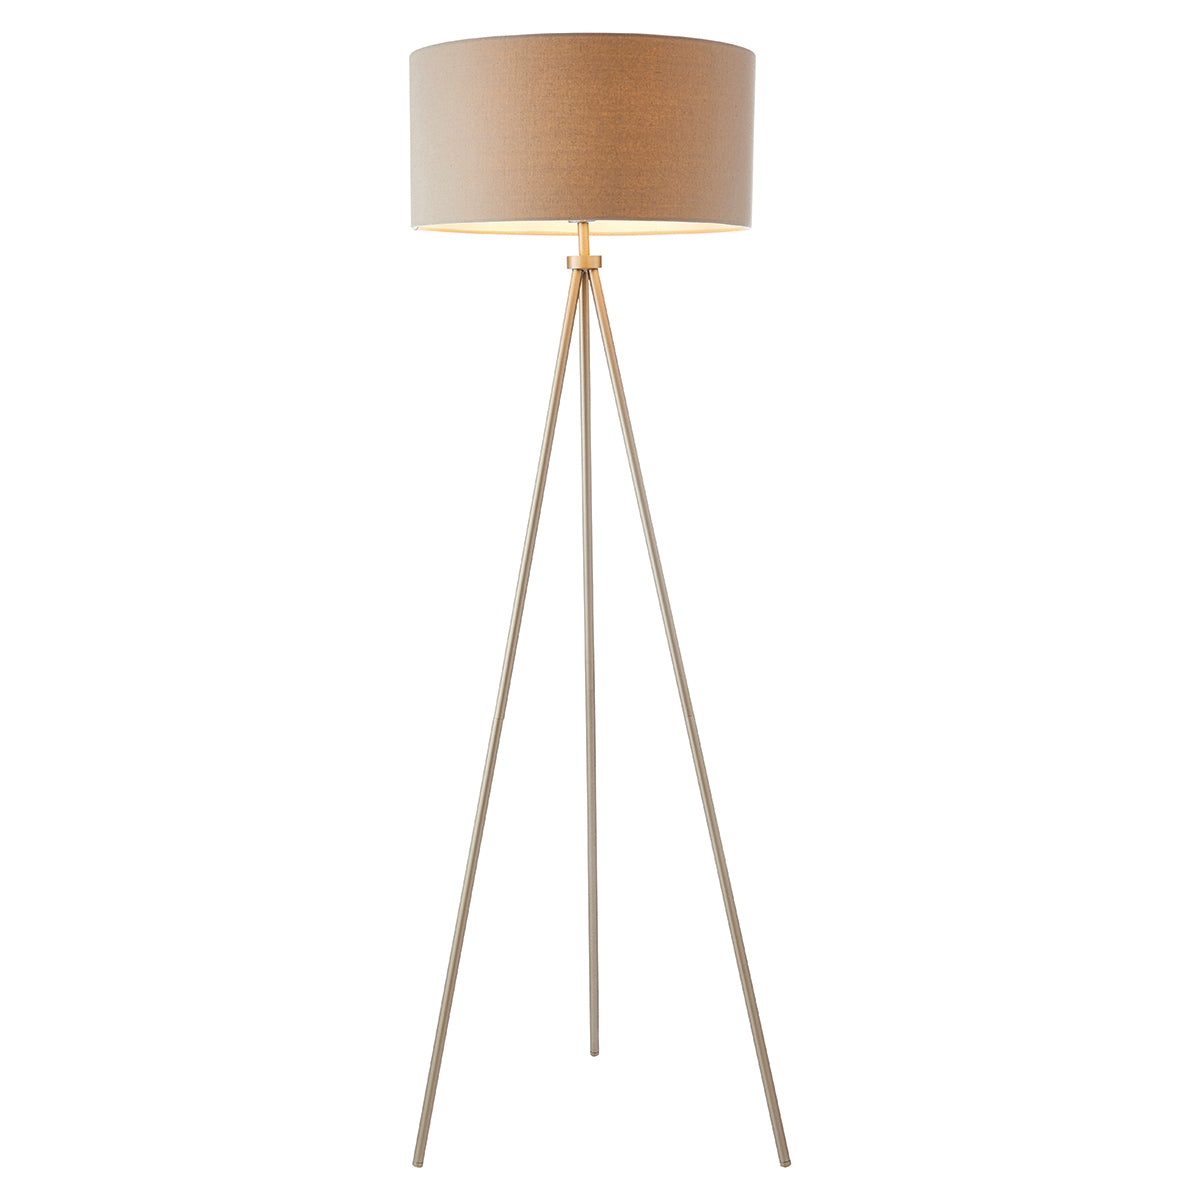 An interior decor lamp with a beige shade.